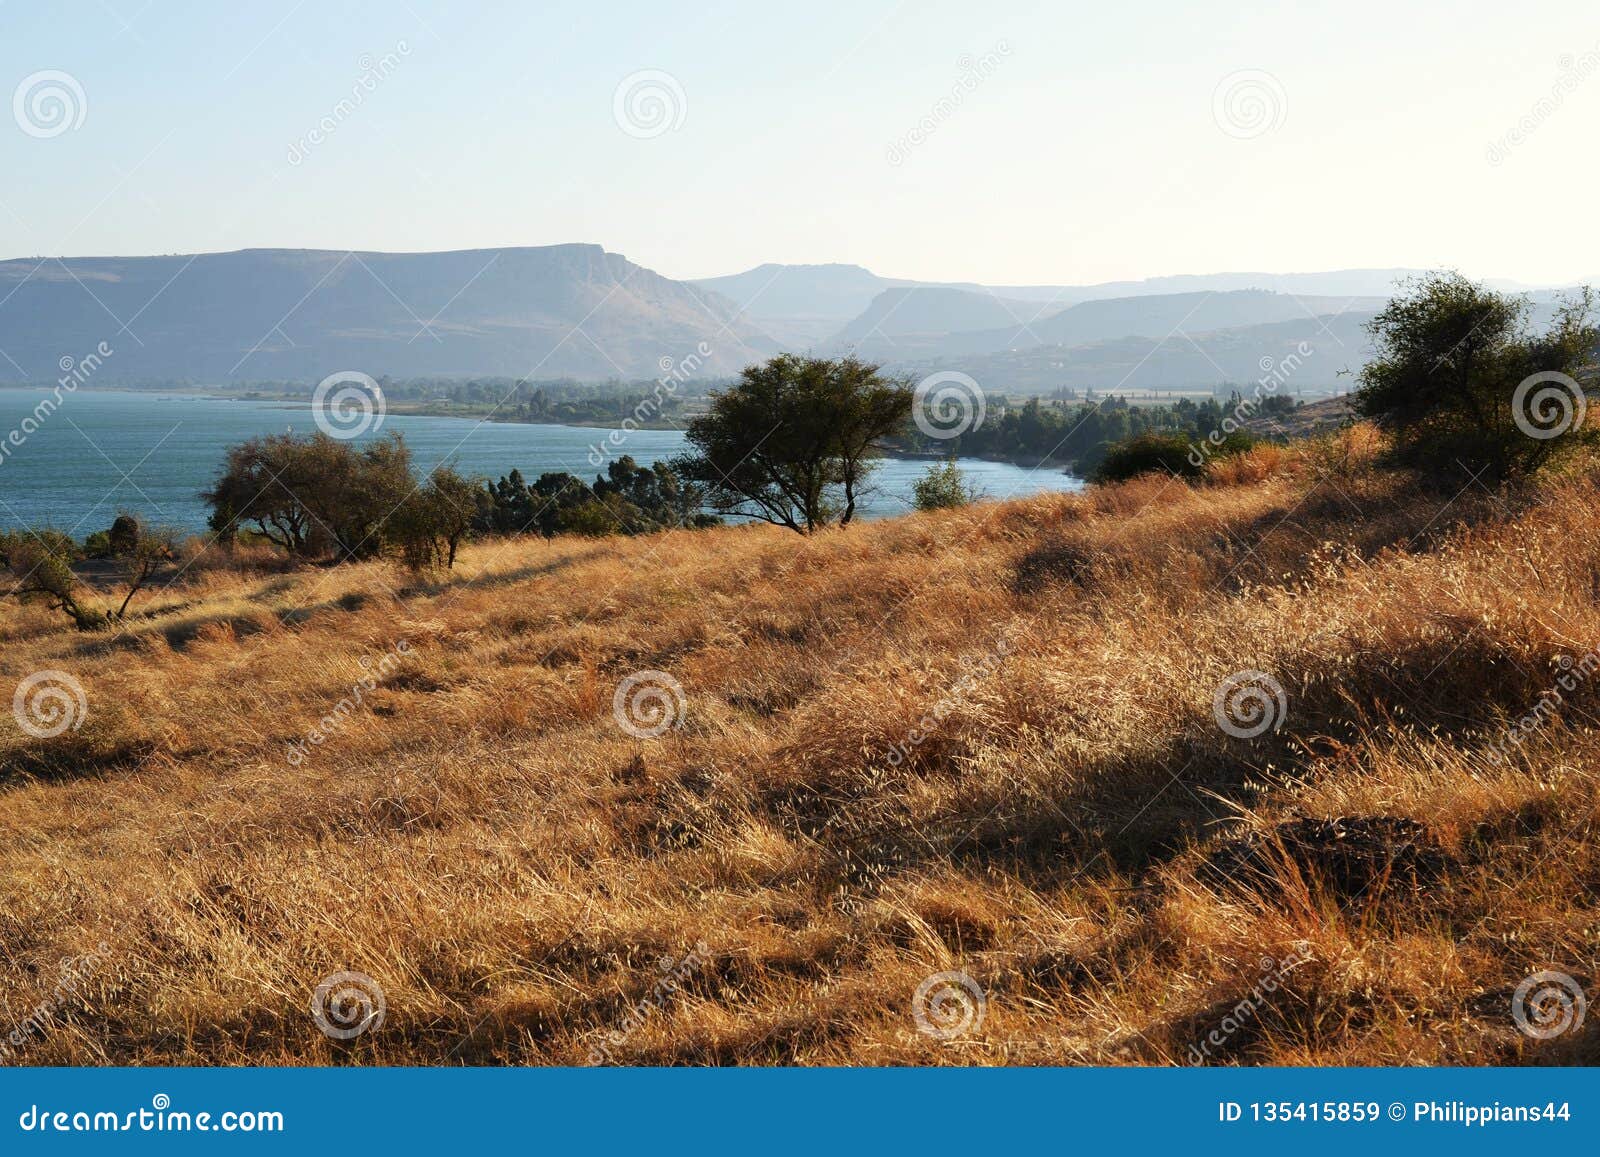 the sea of galilee and church of the beatitudes, israel, sermon of the mount of jesus